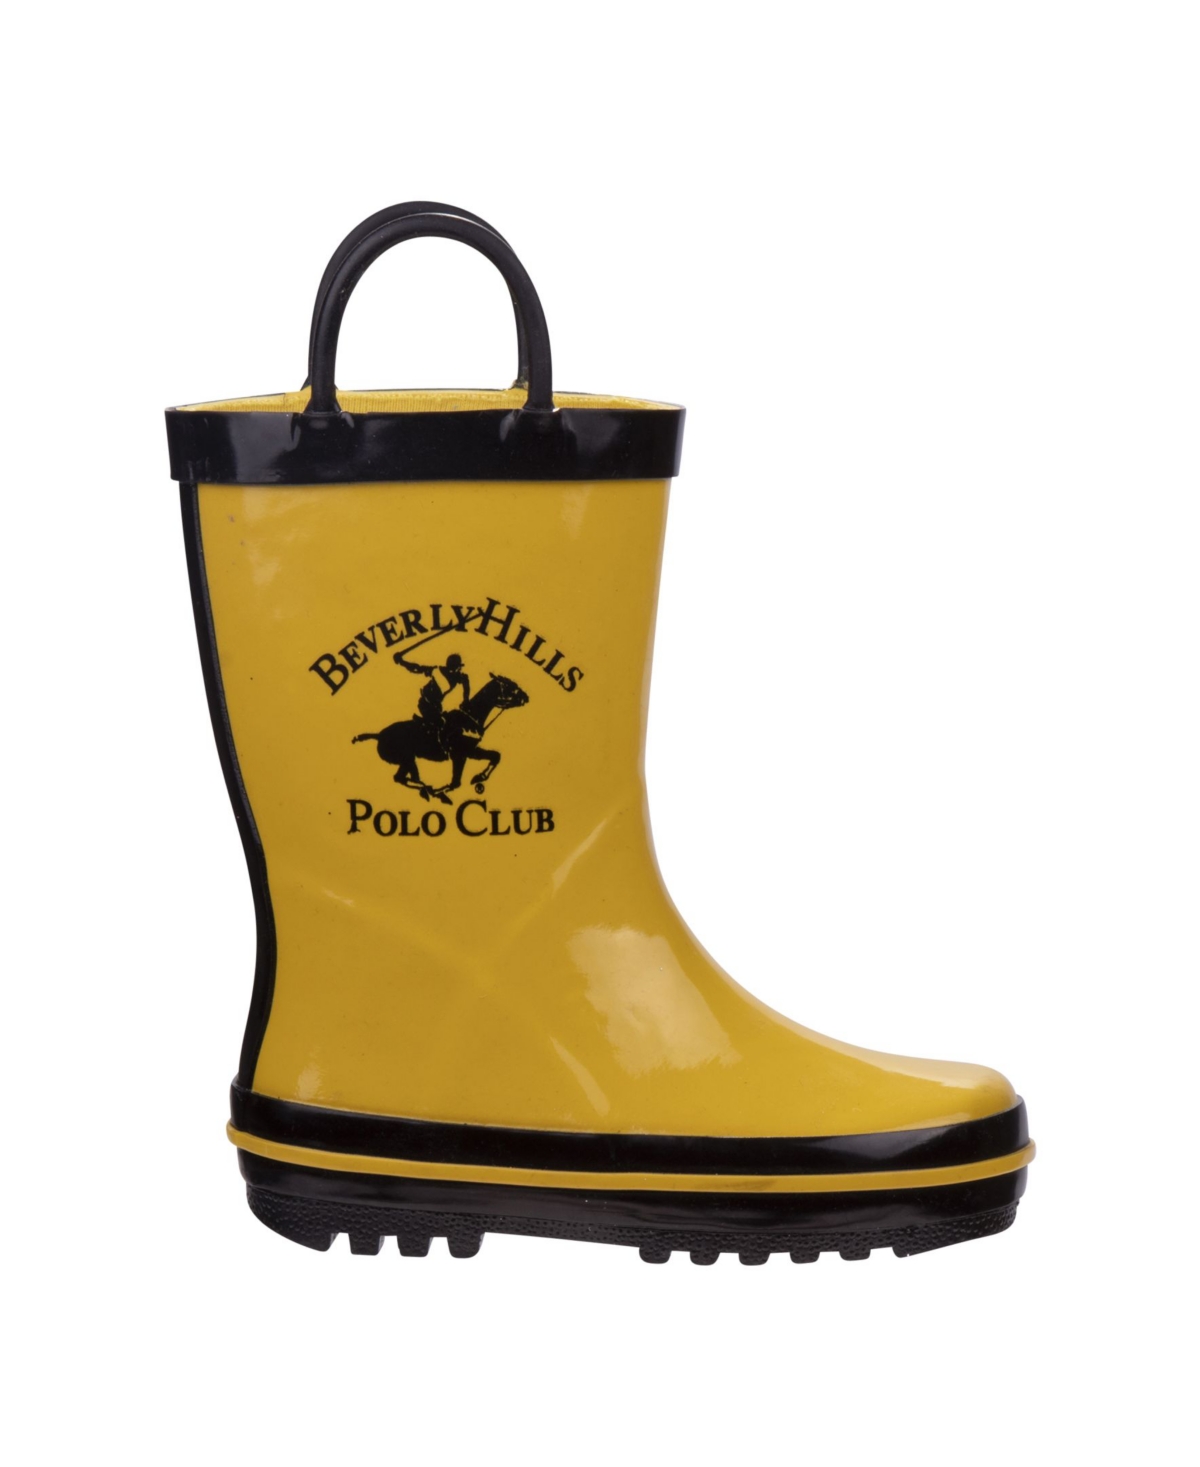 BEVERLY HILLS POLO CLUB LITTLE BOYS AND GIRLS BOOT